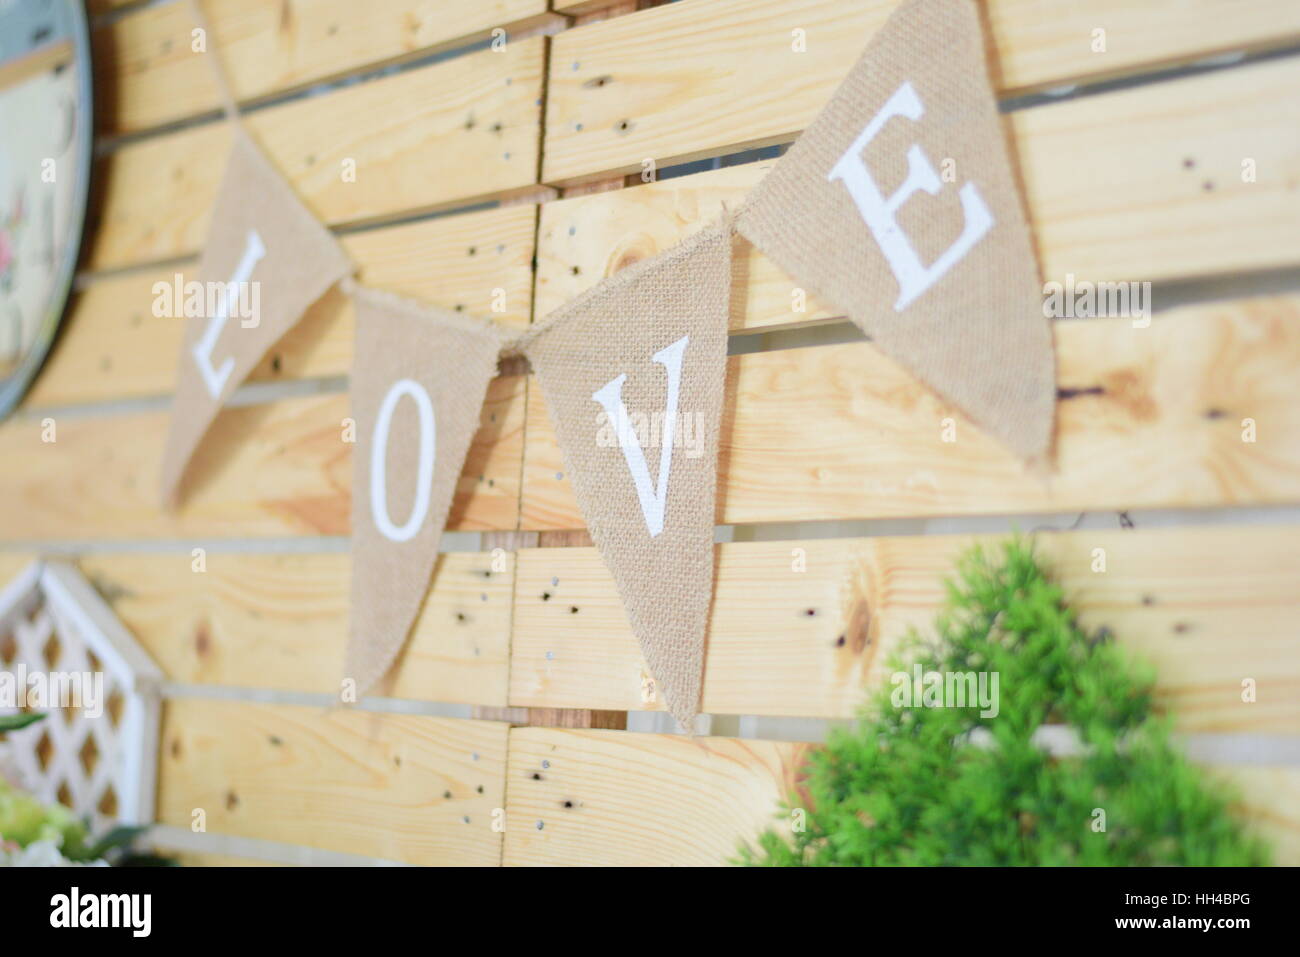 Hanging 'LOVE' letters besides wooden wall Stock Photo